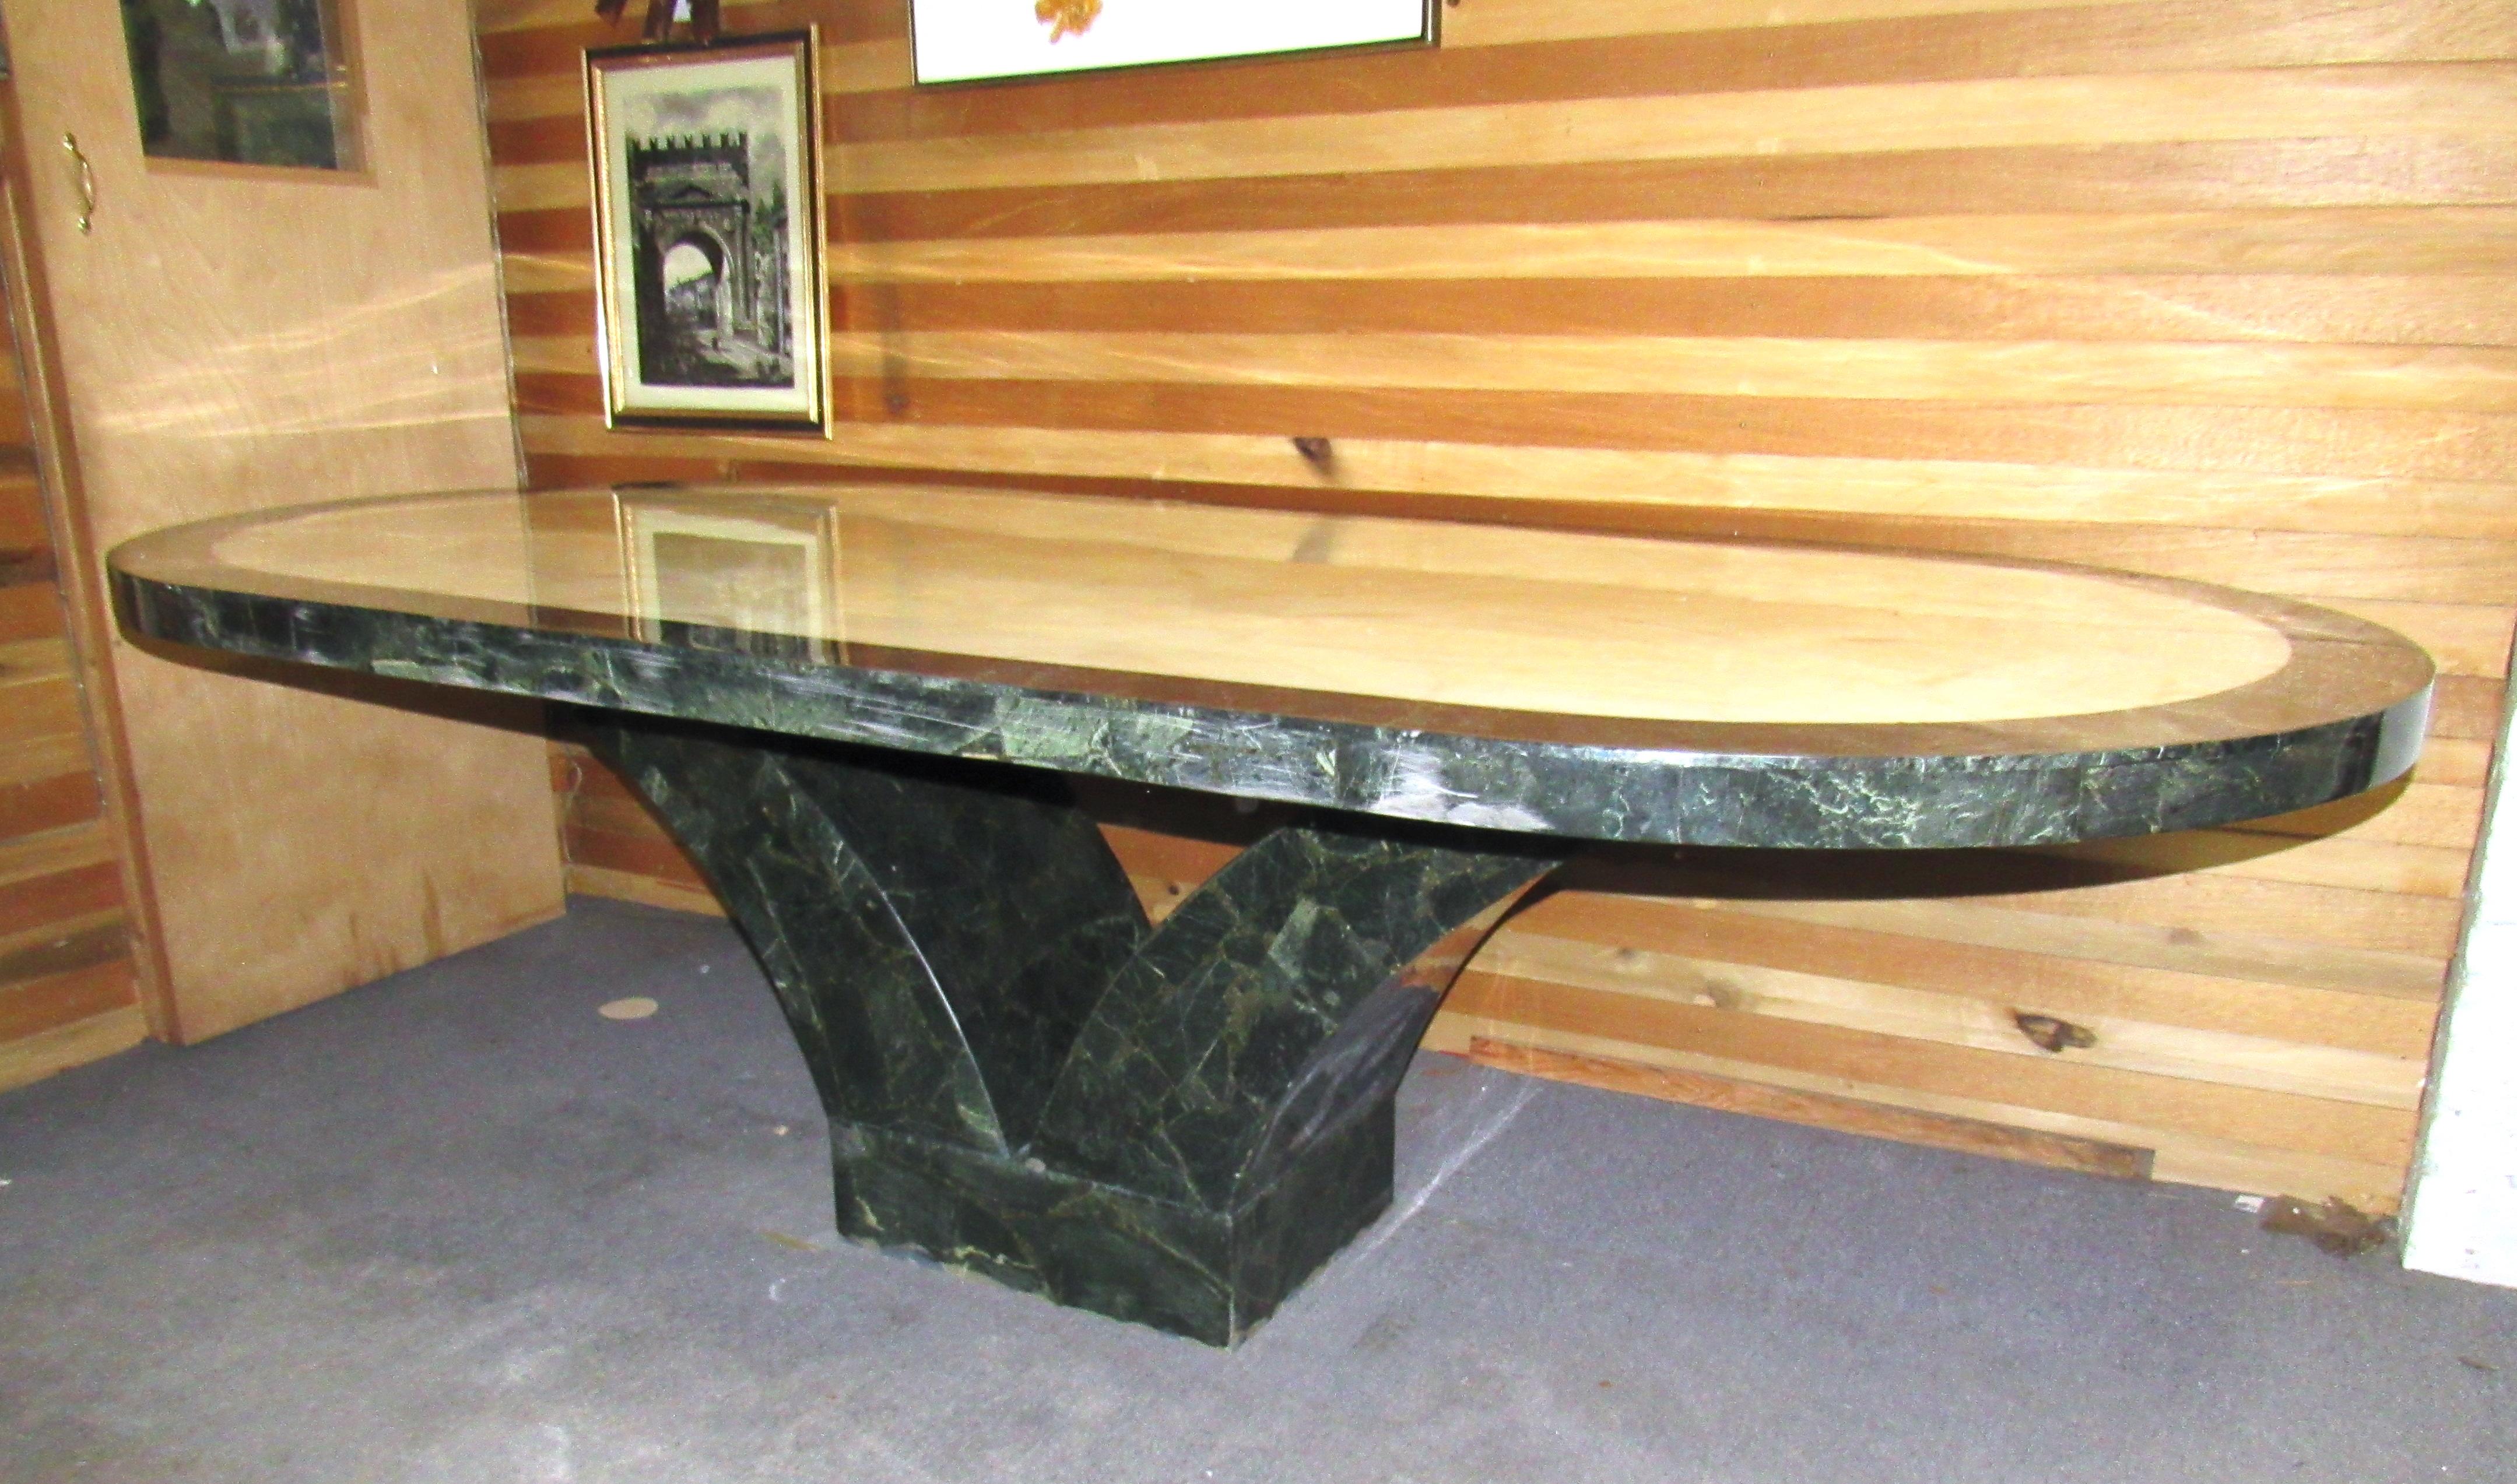 This large Mexican marble dining or conference pedestal table is a 1970's modern piece that makes a bold statement in any home or office. Top table rests on the base.
Location: Brooklyn NY